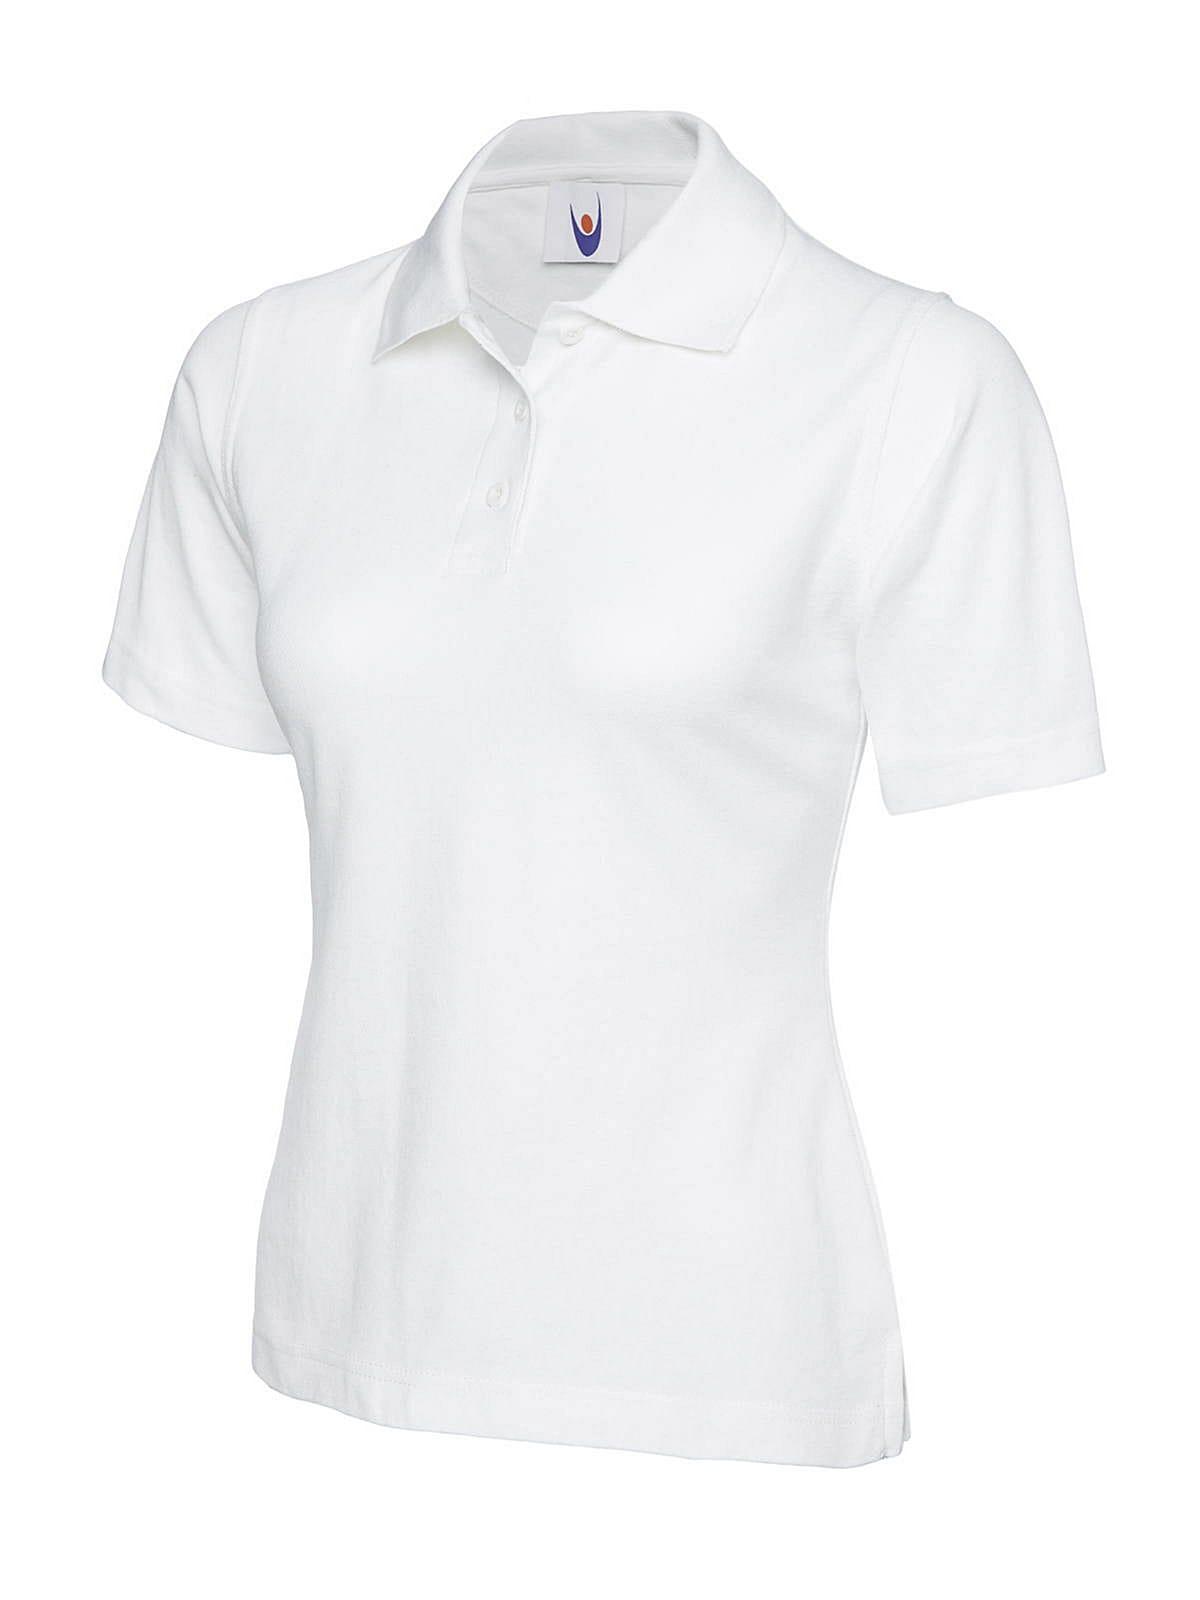 Uneek 220GSM Womens Polo Shirt in White (Product Code: UC106)